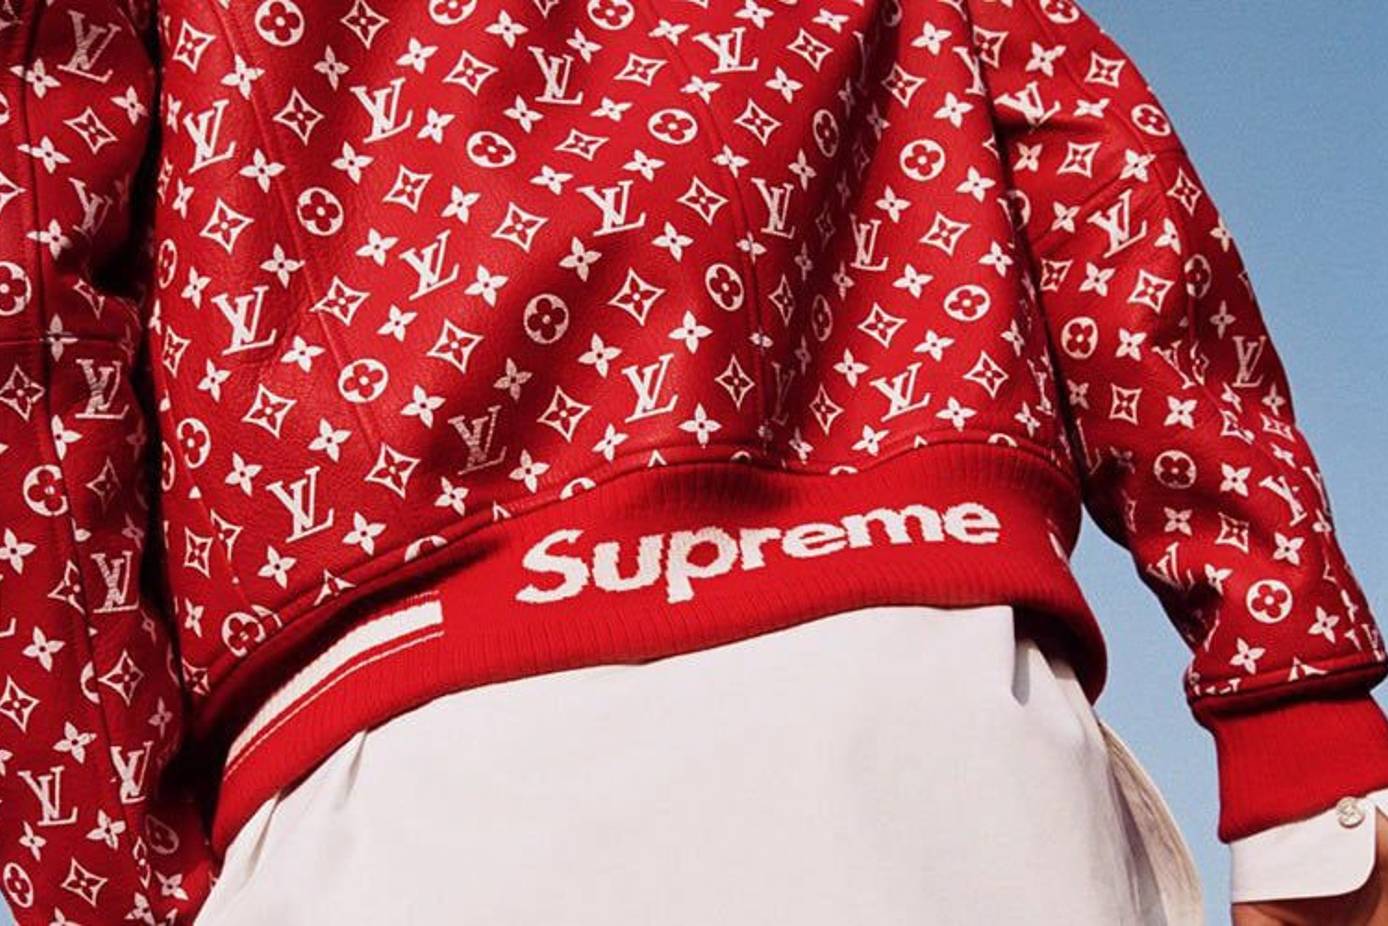 What happened during the launch of Supreme x Louis Vuitton pop-up